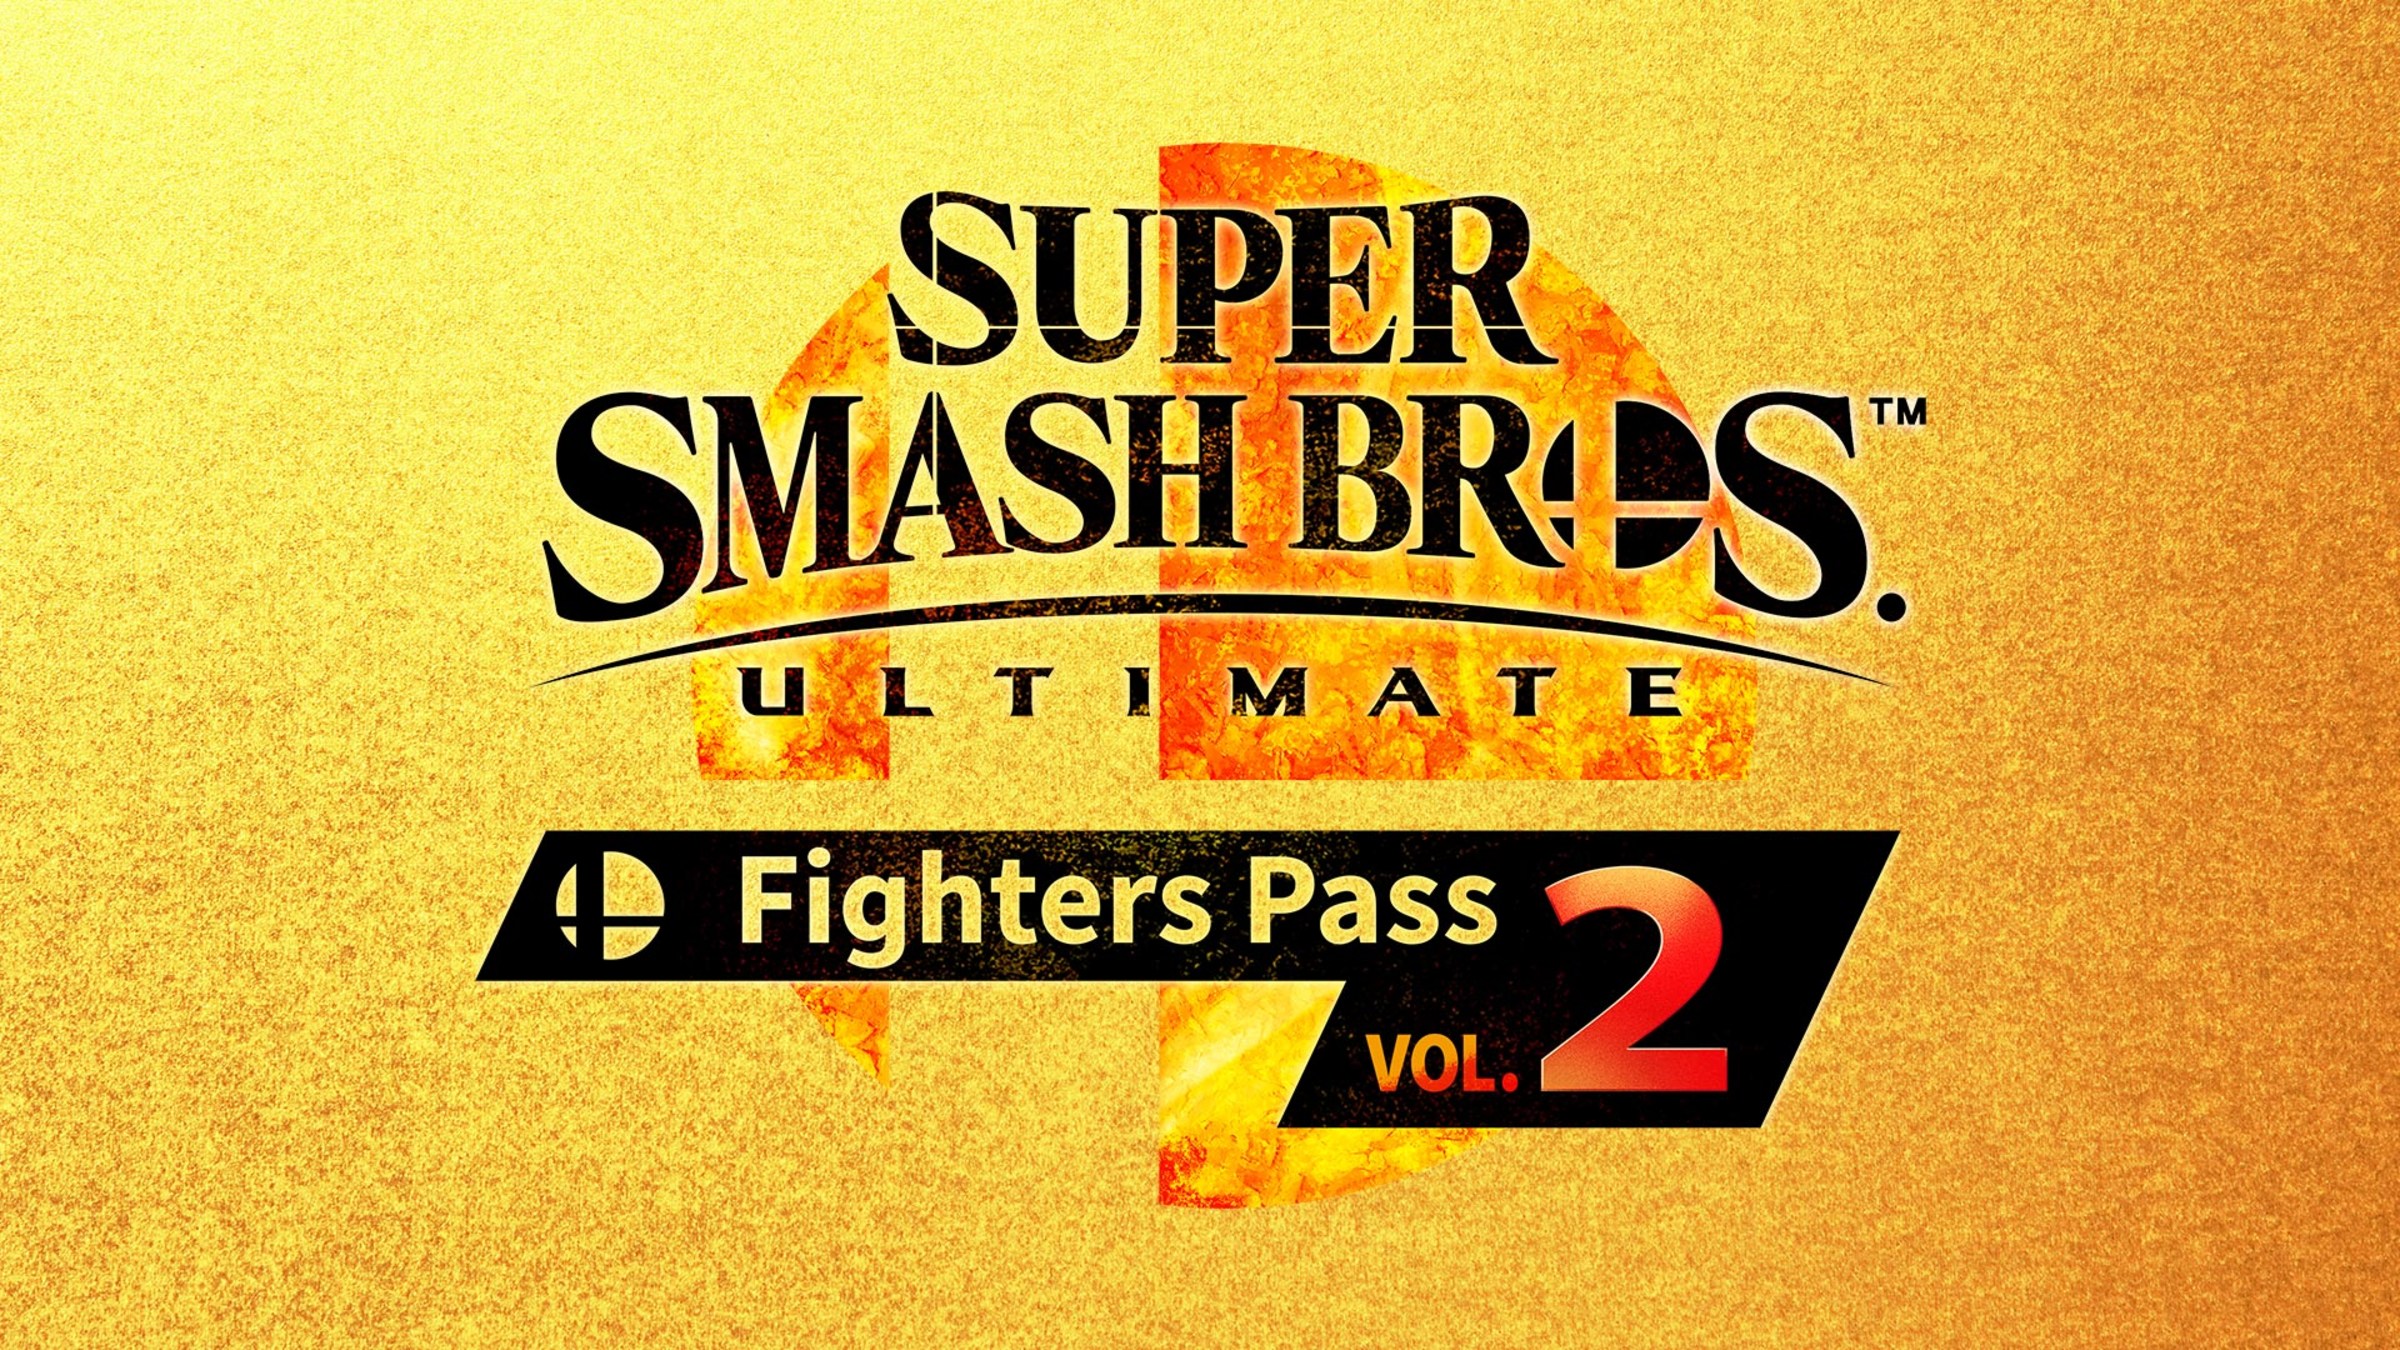 Nintendo Bros.™ Pass Fighters Nintendo Switch Official 2 Super - for Vol. Site Ultimate: Smash